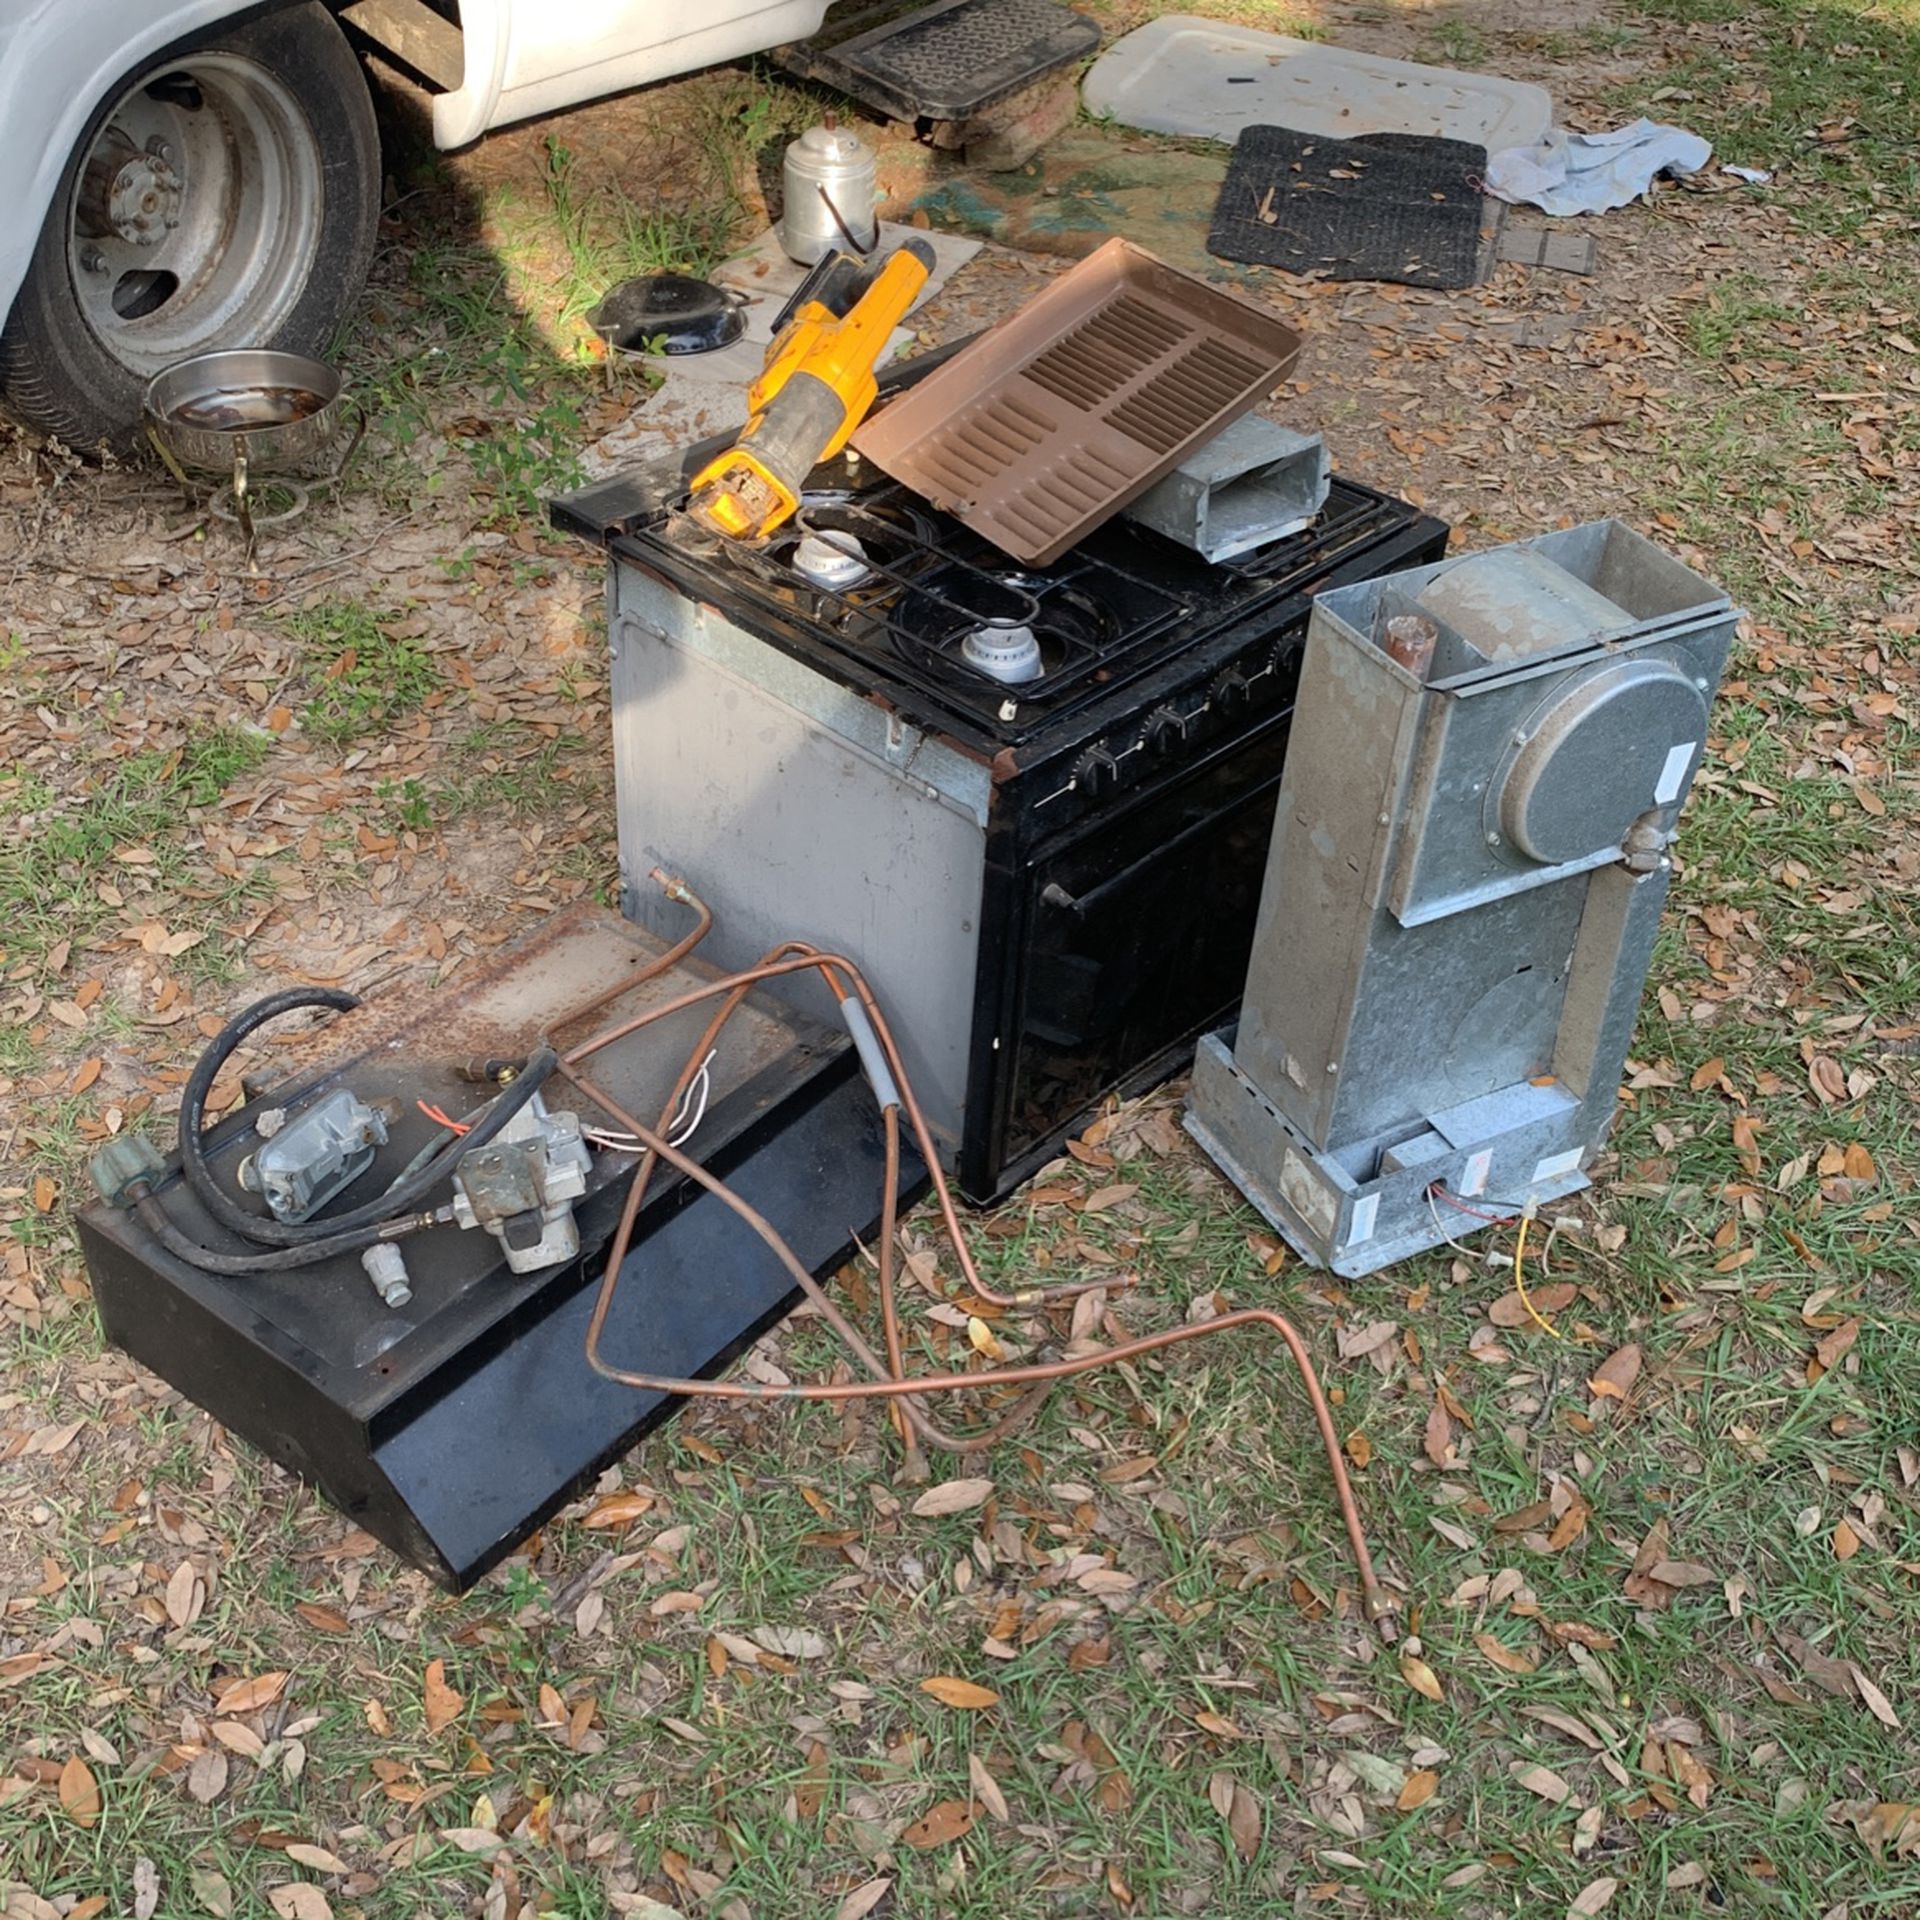 FREE RV STOVE/OVEN plus Other